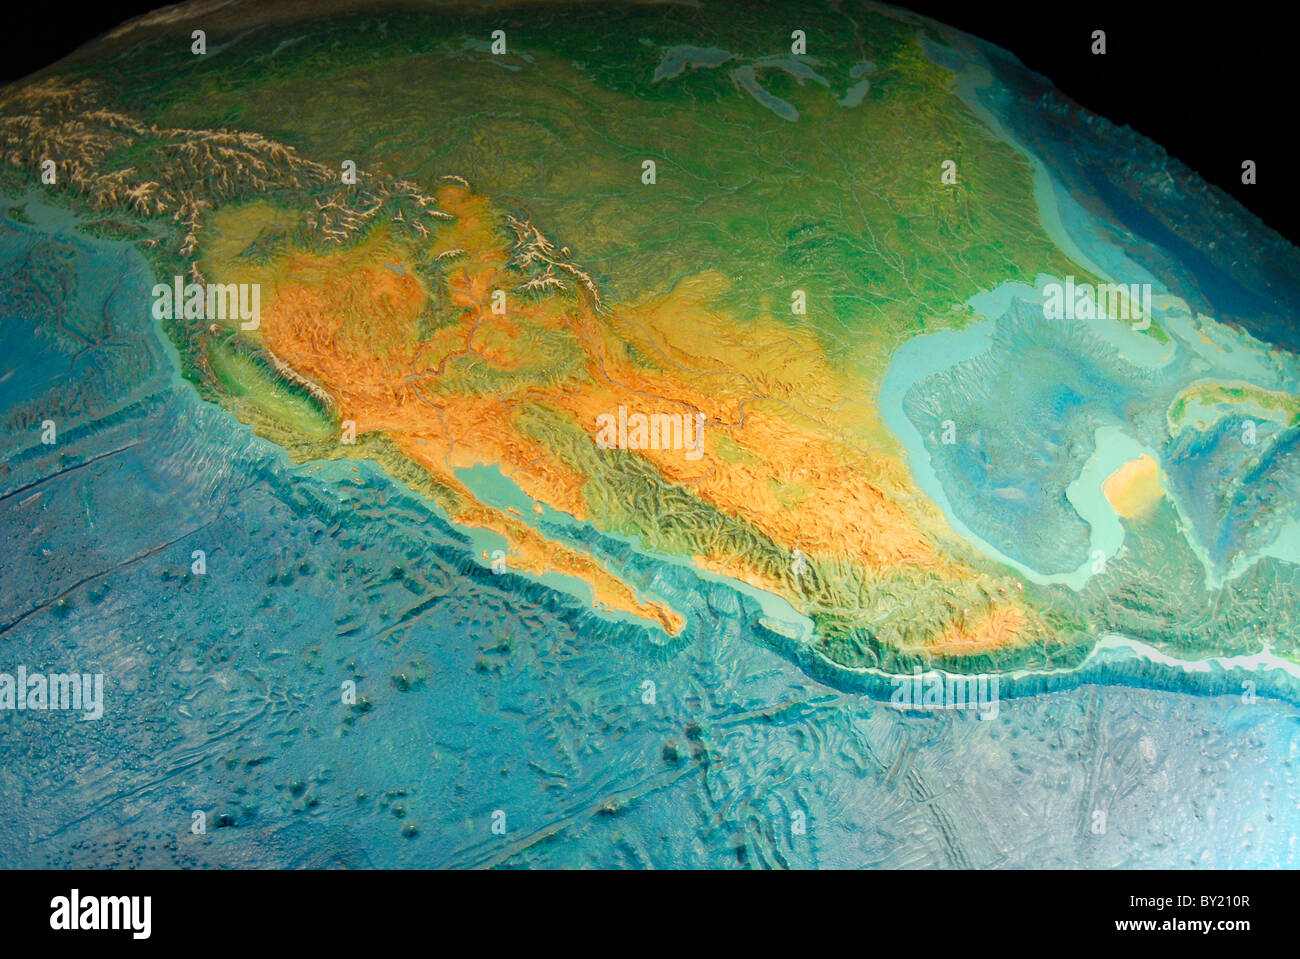 OLD ORBIT PACIFIC BIG RICH SALT SEA SHOW SPACE TERRAIN TEXTURE TOGETHER HOME GREAT WATER WORLD YELLOW MASSIVE COAST HISTORY COOL NEARBY LAND FAMILIAR Stock Photo